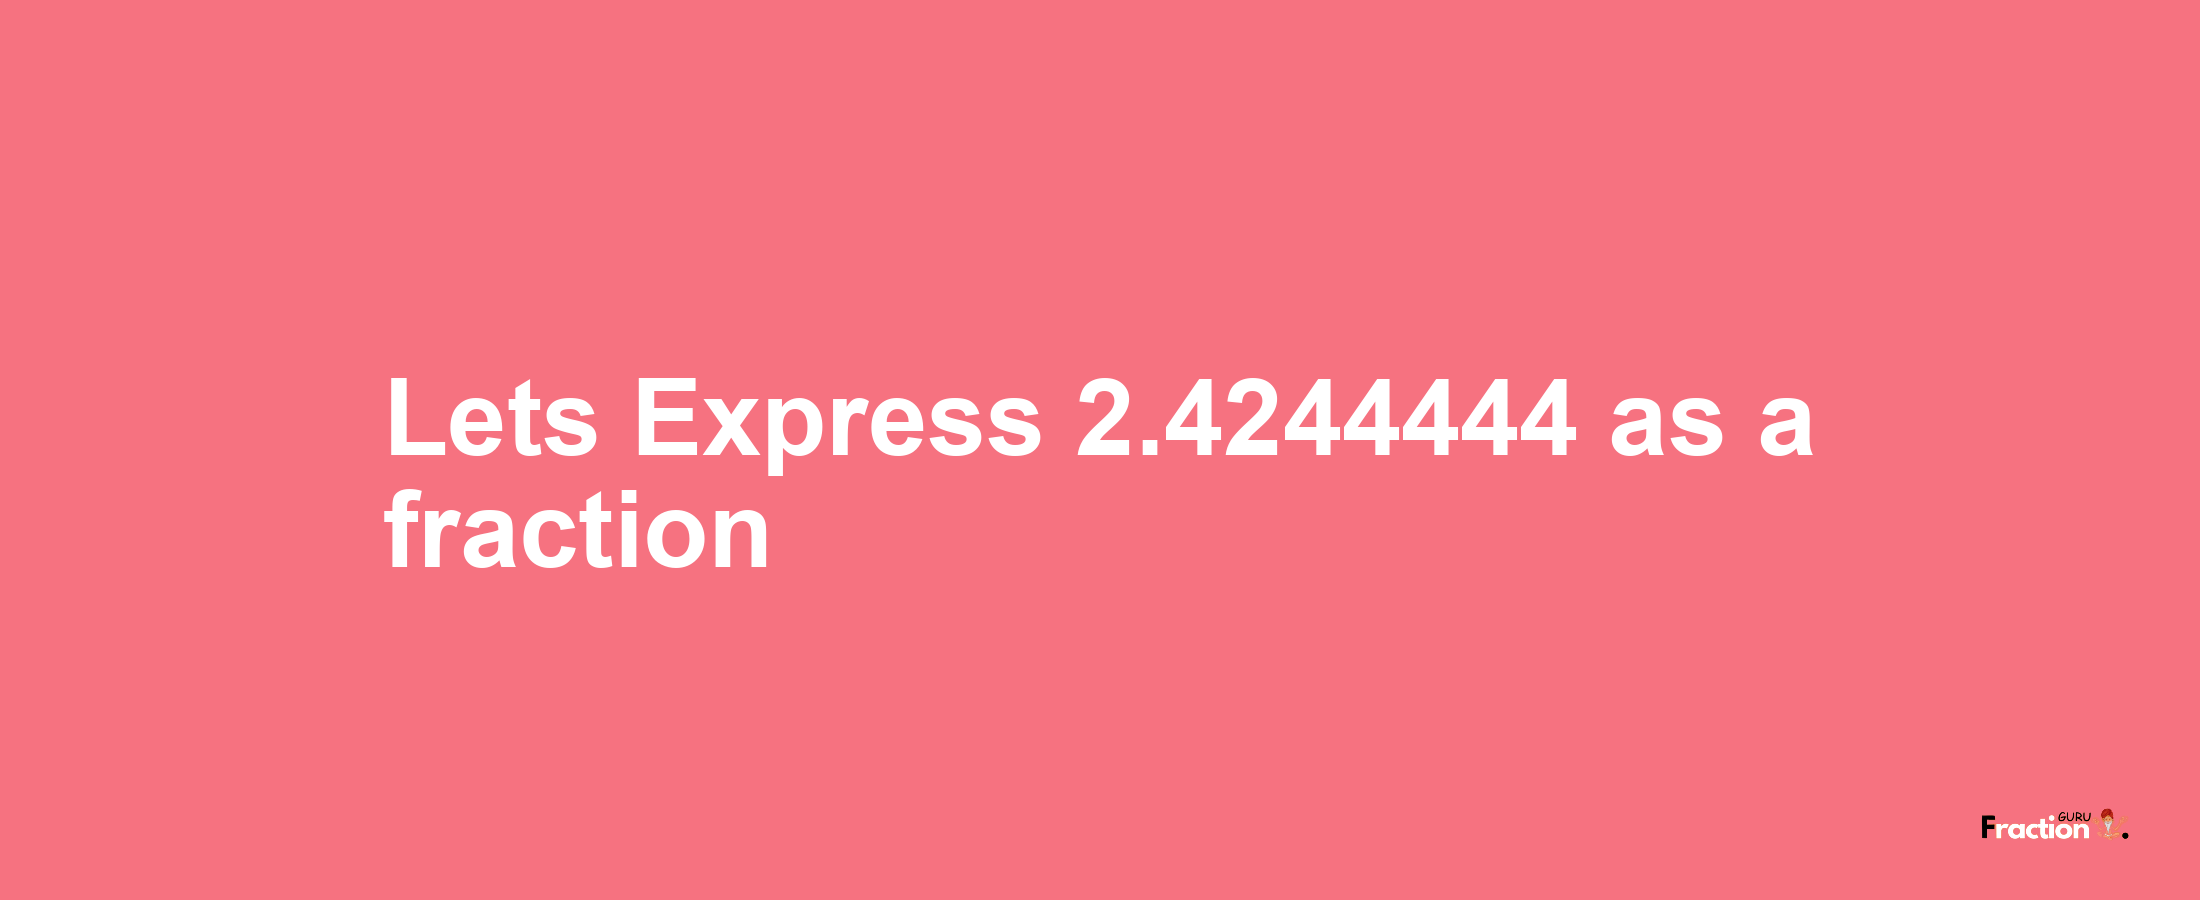 Lets Express 2.4244444 as afraction